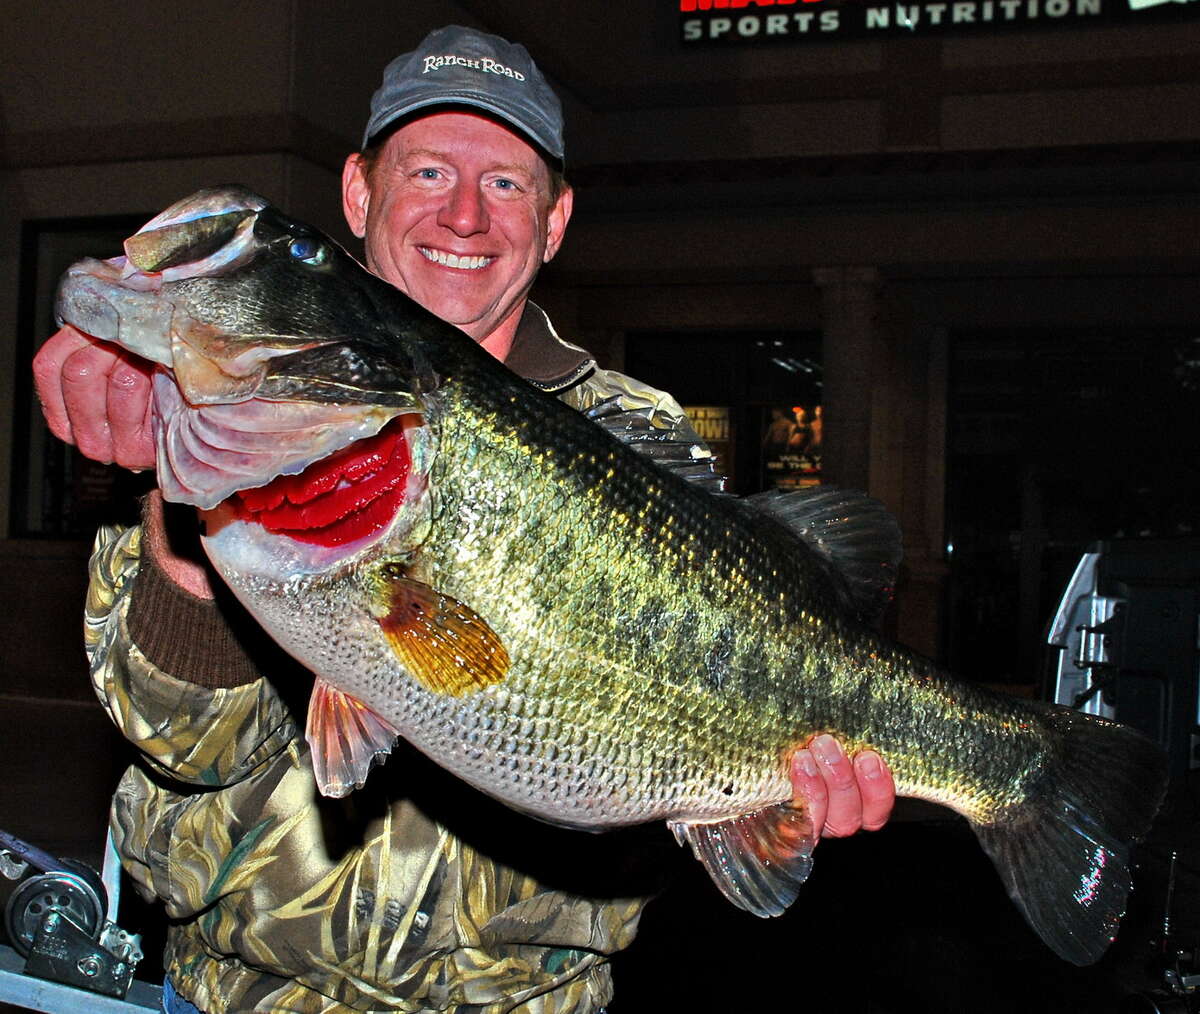 Photos Of The Biggest Largemouth Bass In Texas